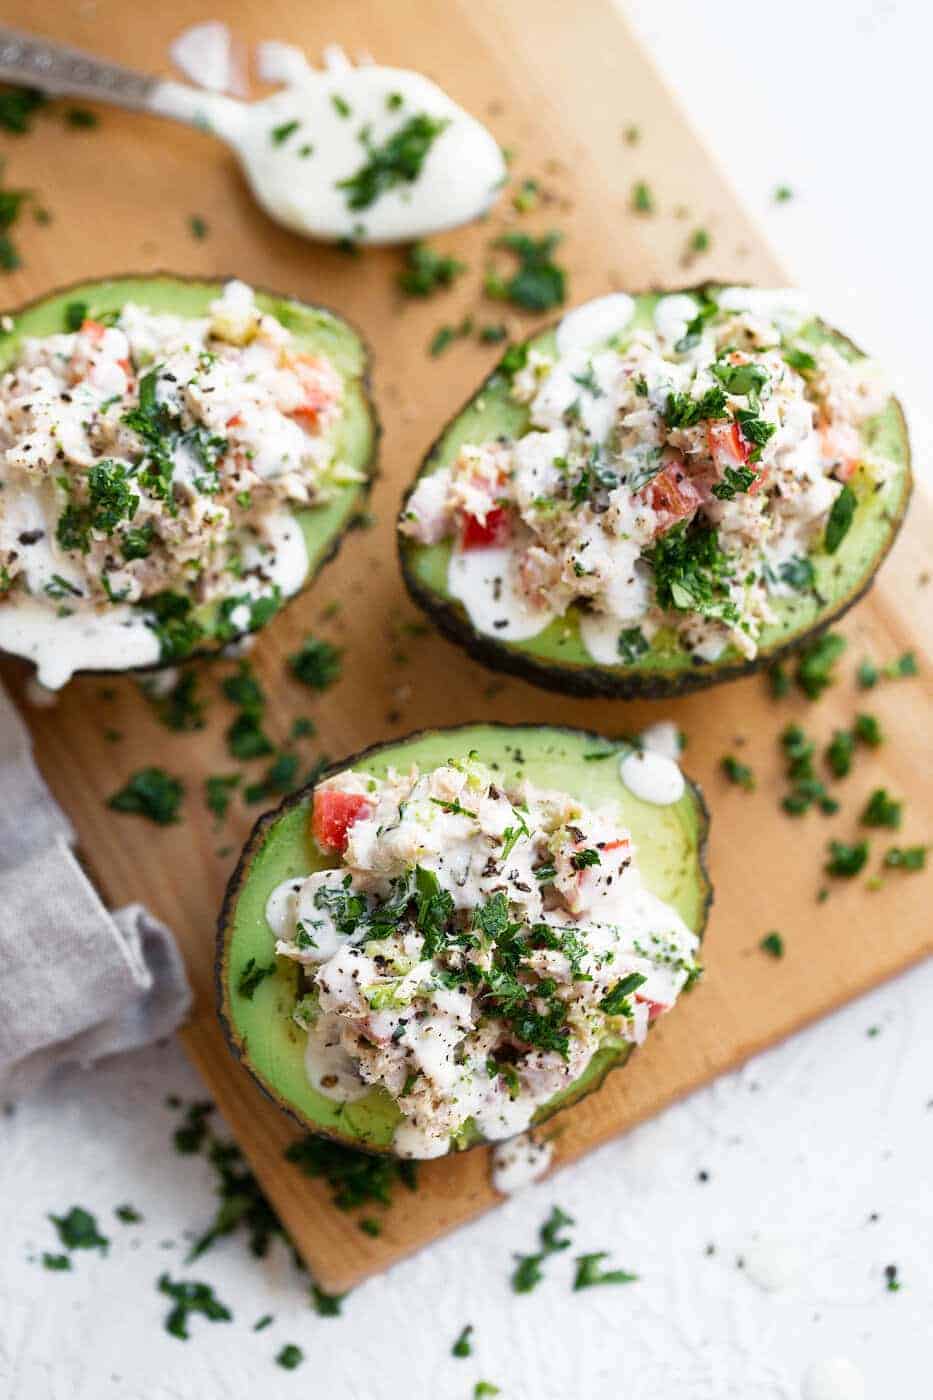 Avocados filled with tuna salad on a wooden chopping board